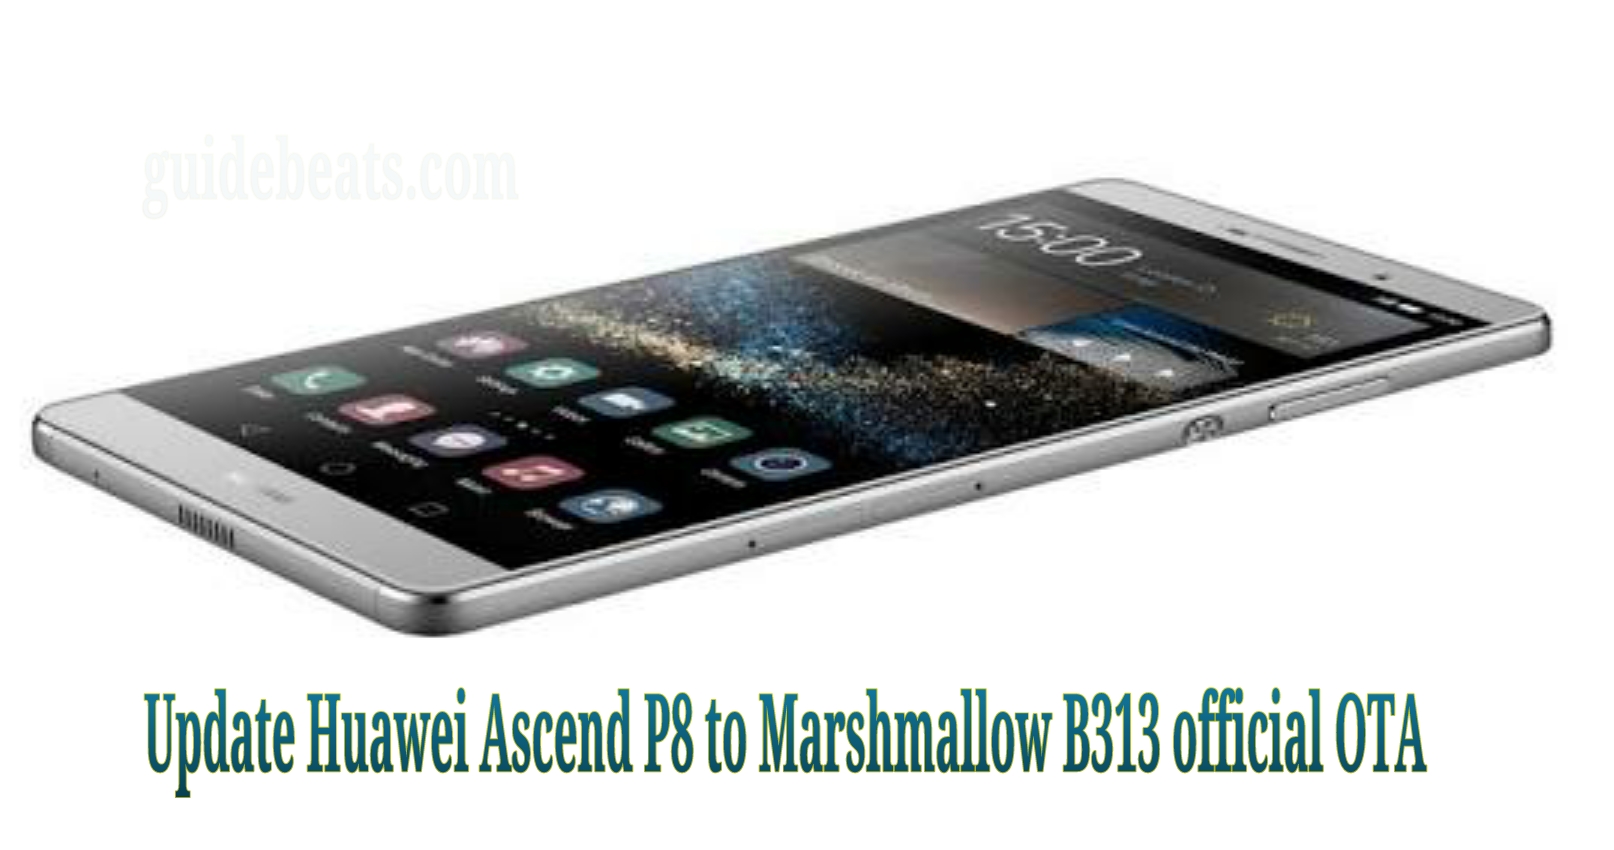 update Huawei Ascend P8 to Marshmallow